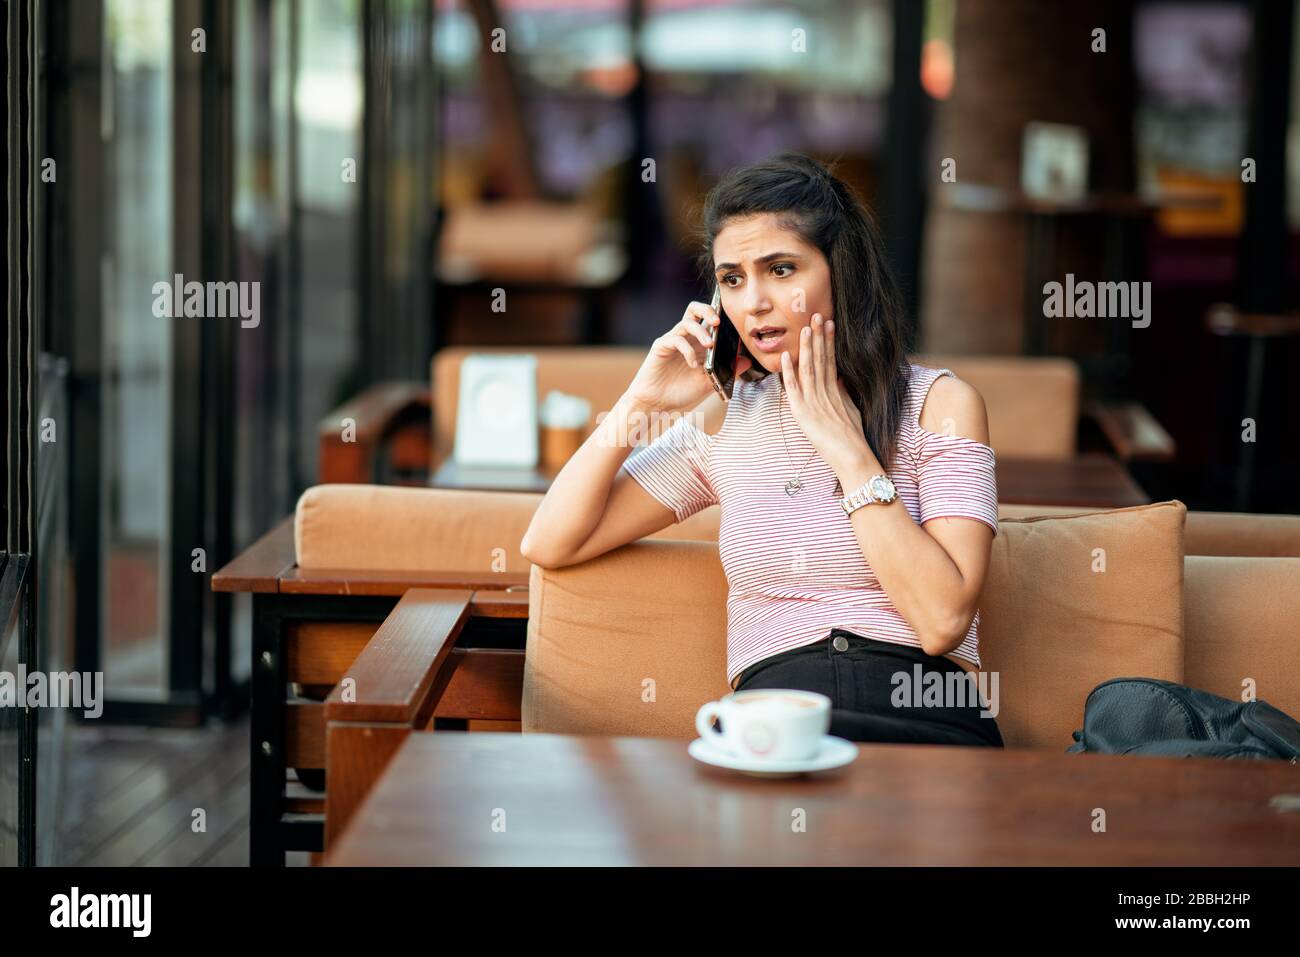 Young woman speak with phone and have a suprised and worried face in an elegance cafe Stock Photo